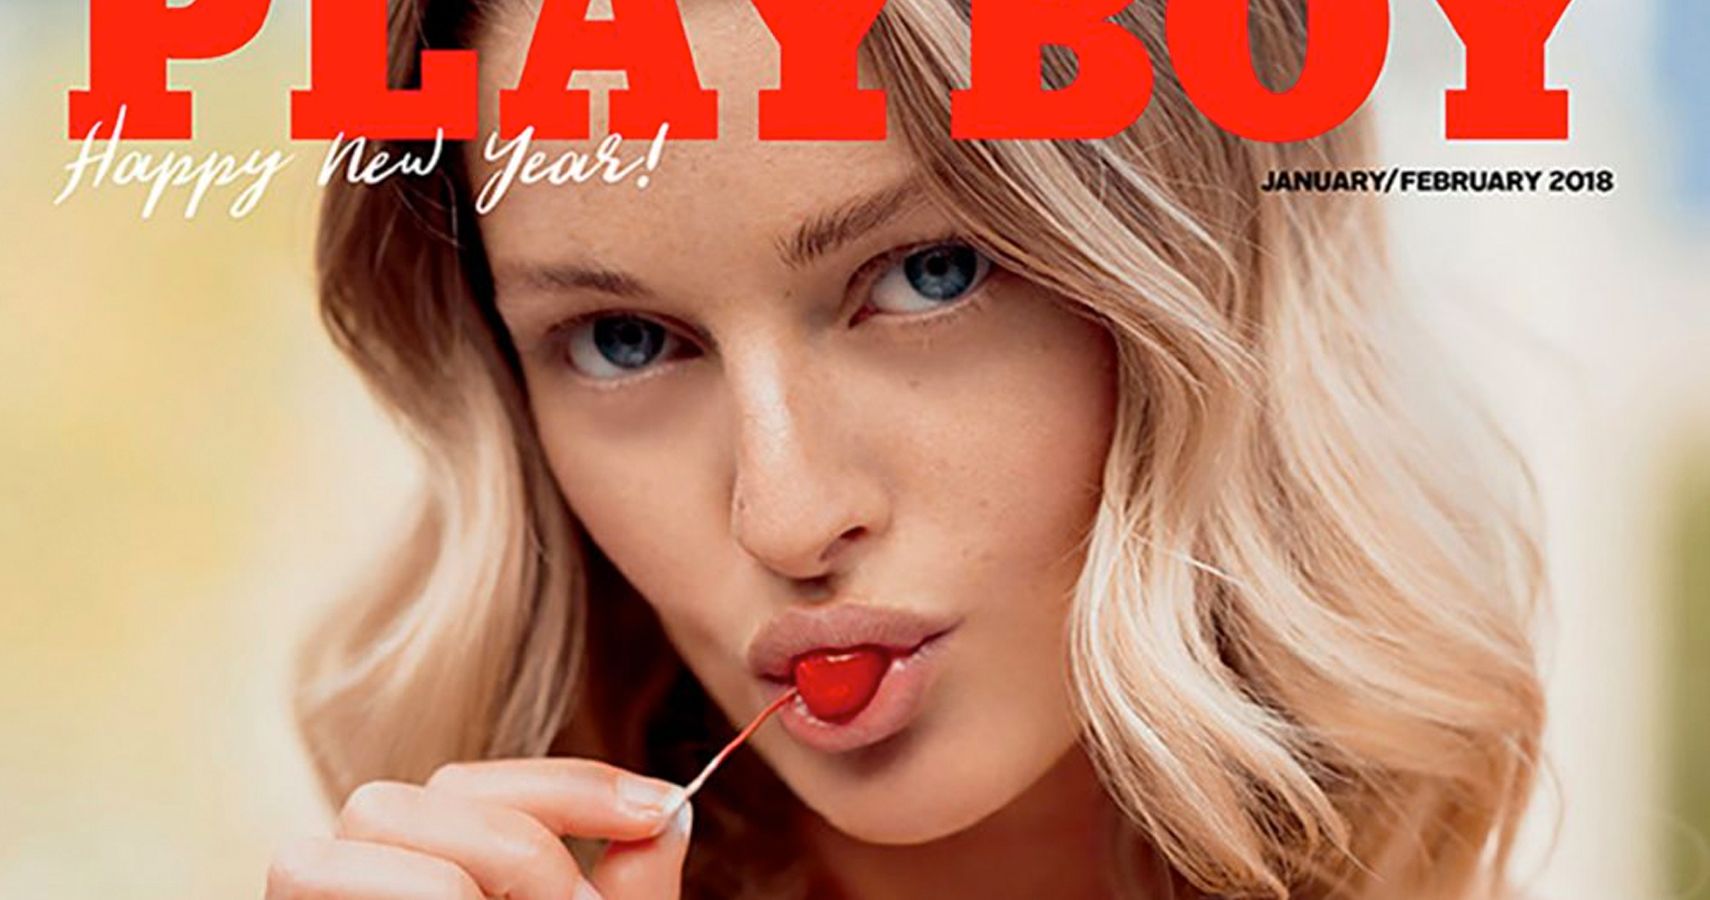 Playboy cover 2018